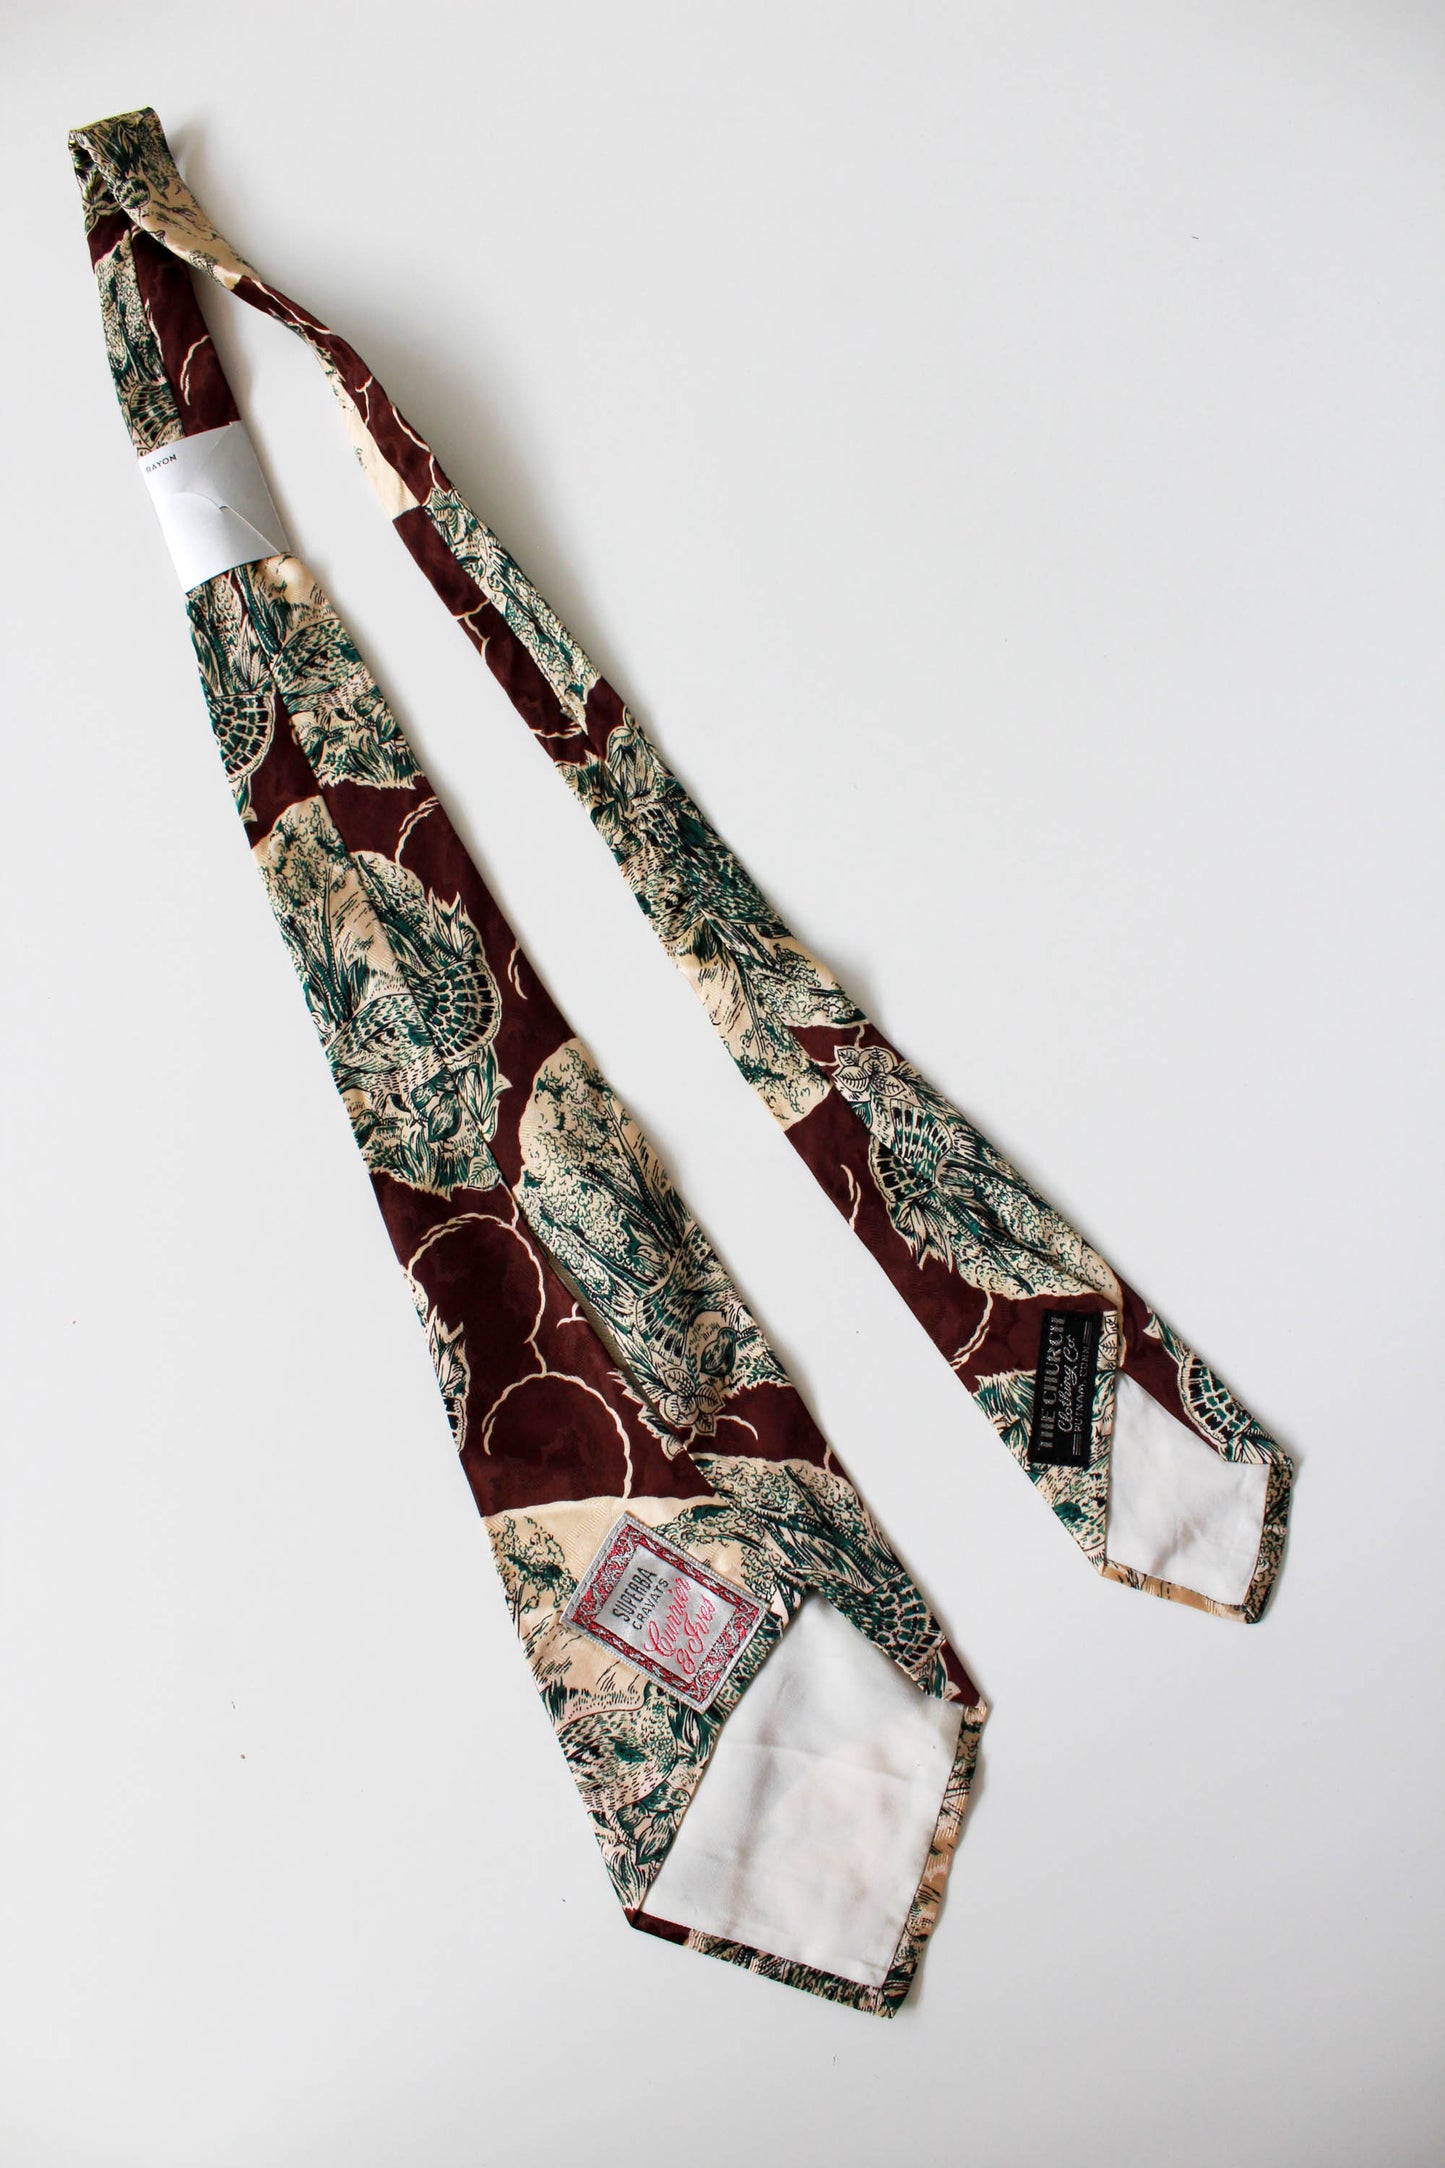 1940s superba rayon necktie, brown with green and beige bird and landscape illustration, wide tongue rayon tie